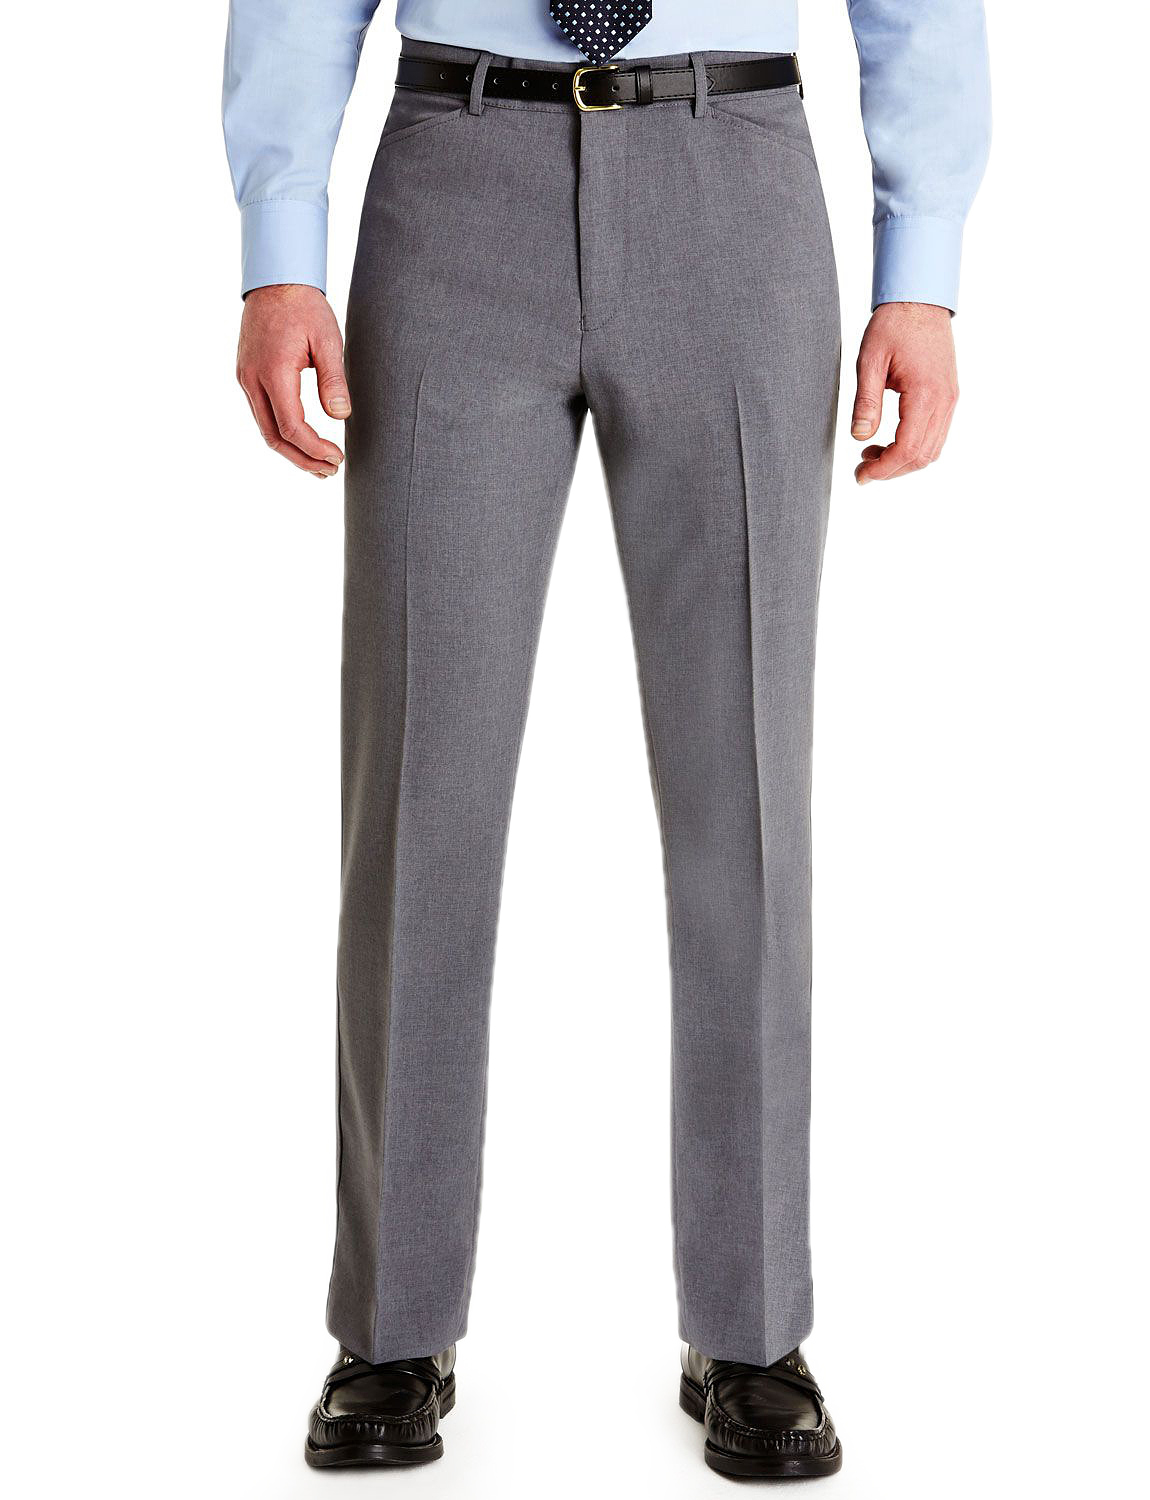 frogmouth pocket trouser | stylish and versatile formal pants by Farah ...